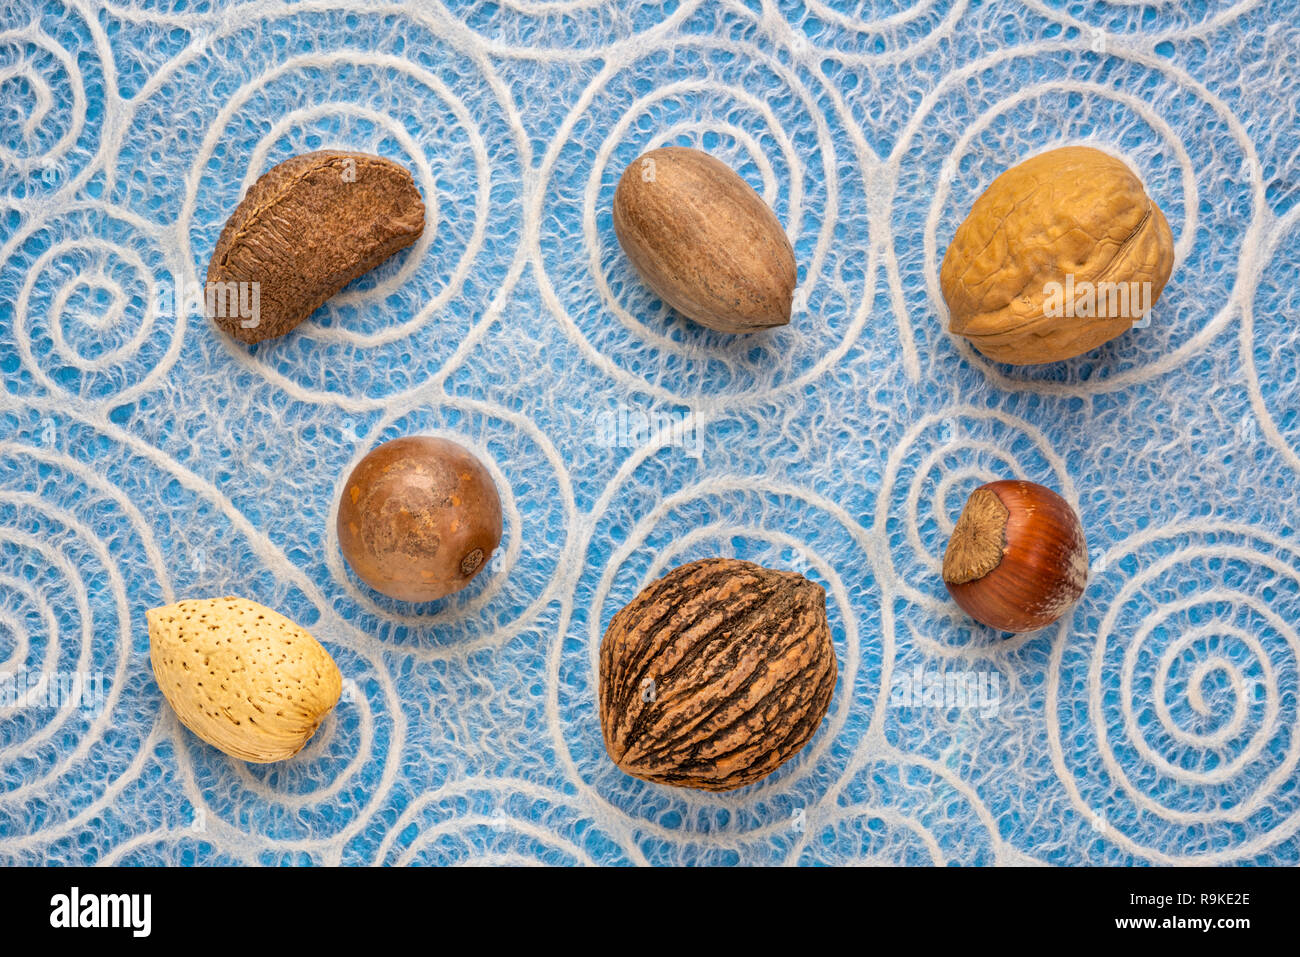 variety of nuts in shells (Brazilian, pecan, English walnut, hazelnut, black walnut, macadamia, almond) against Japanese lace paper with spiral patter Stock Photo